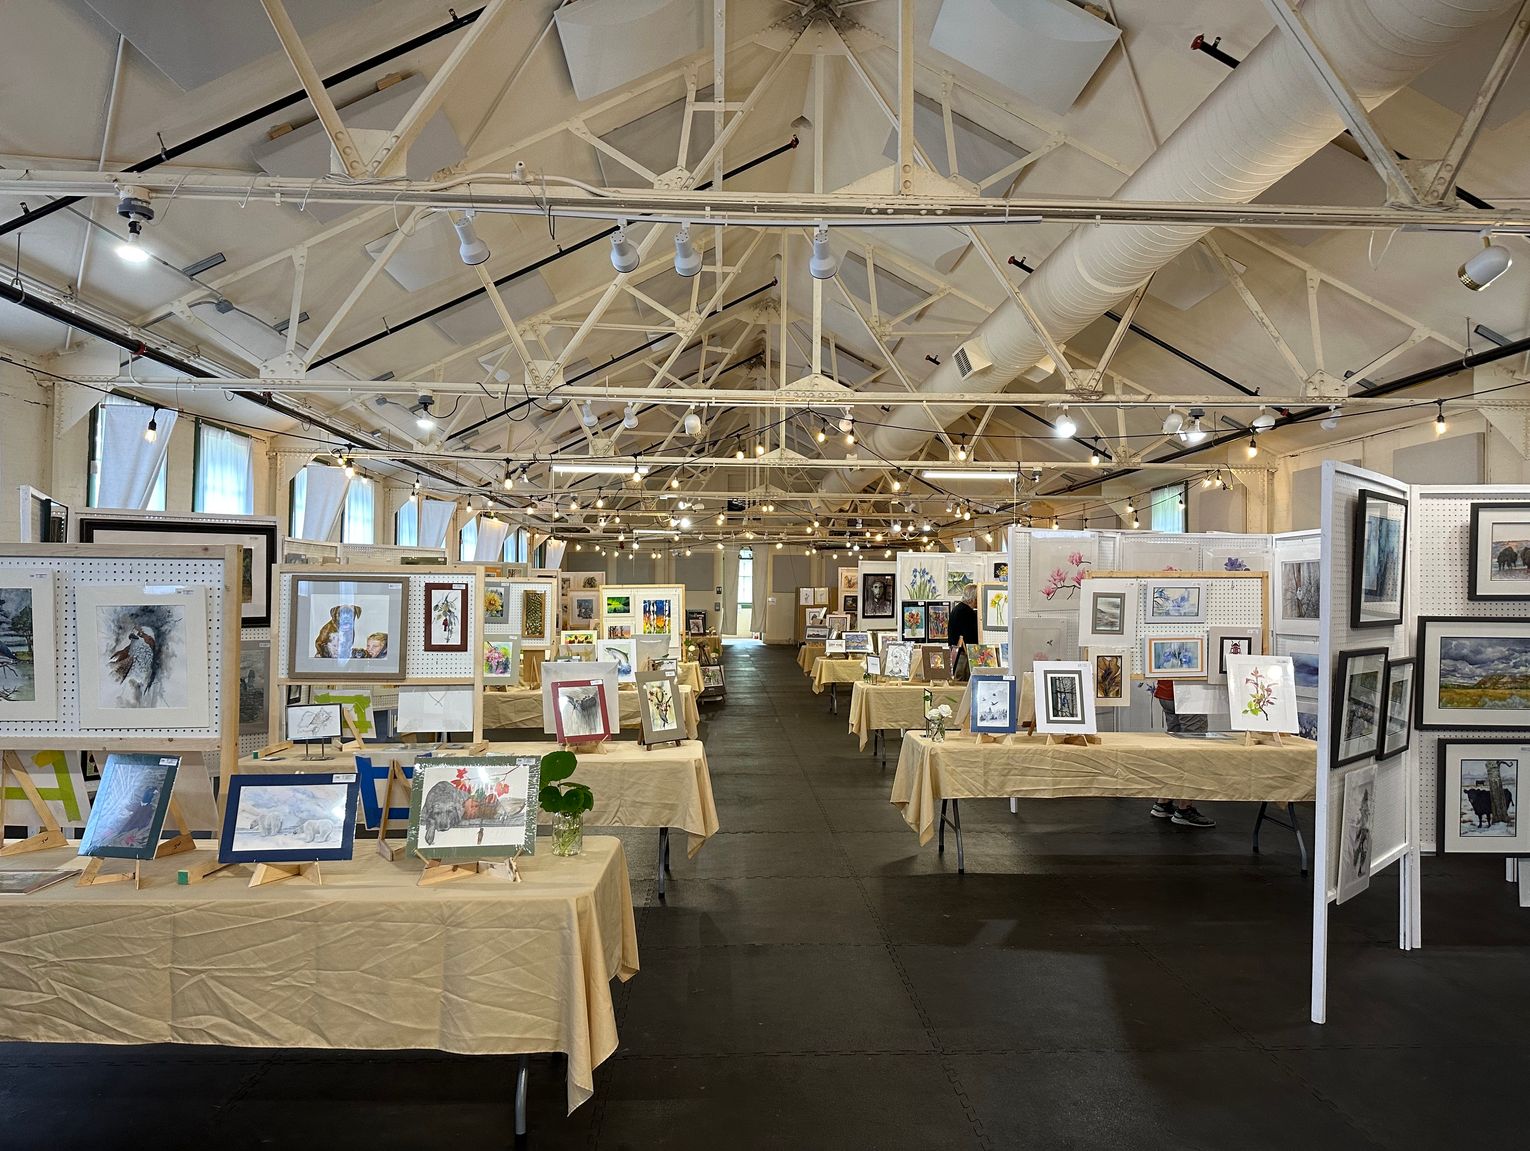 Ely Watercolor Club exhibition from 17 to 21 July